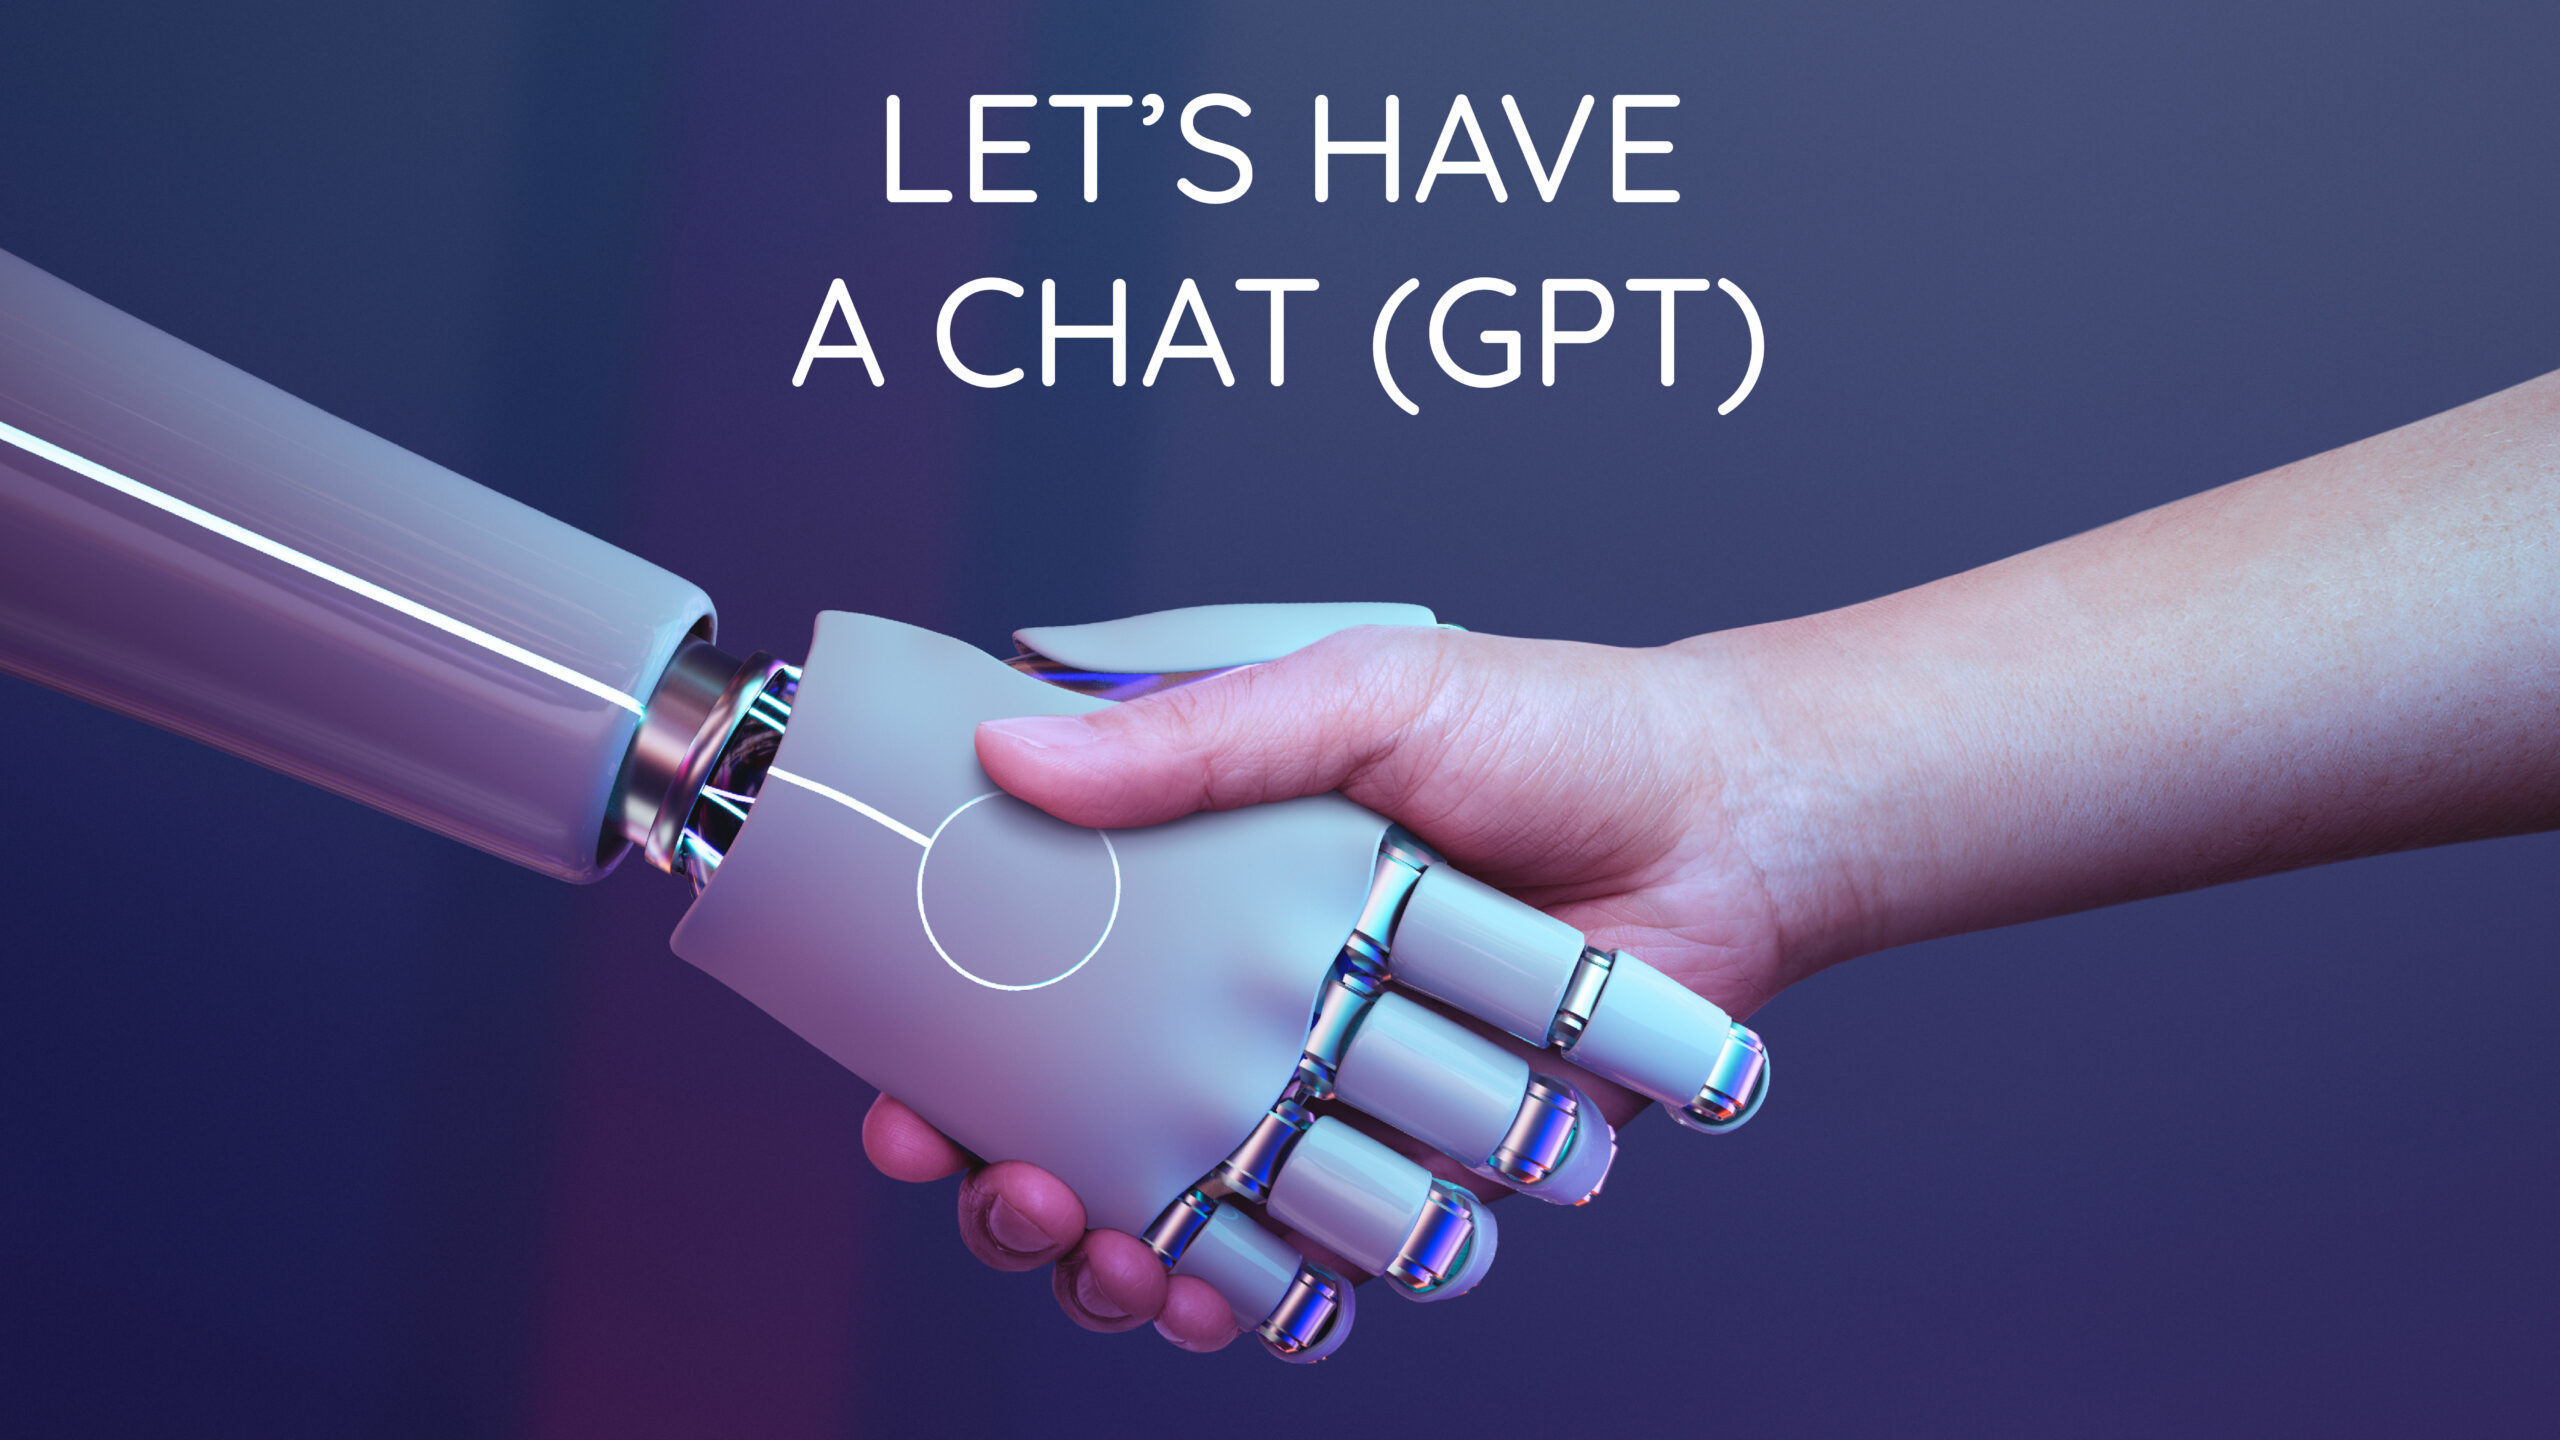 Let’s Have a Chat (GPT)